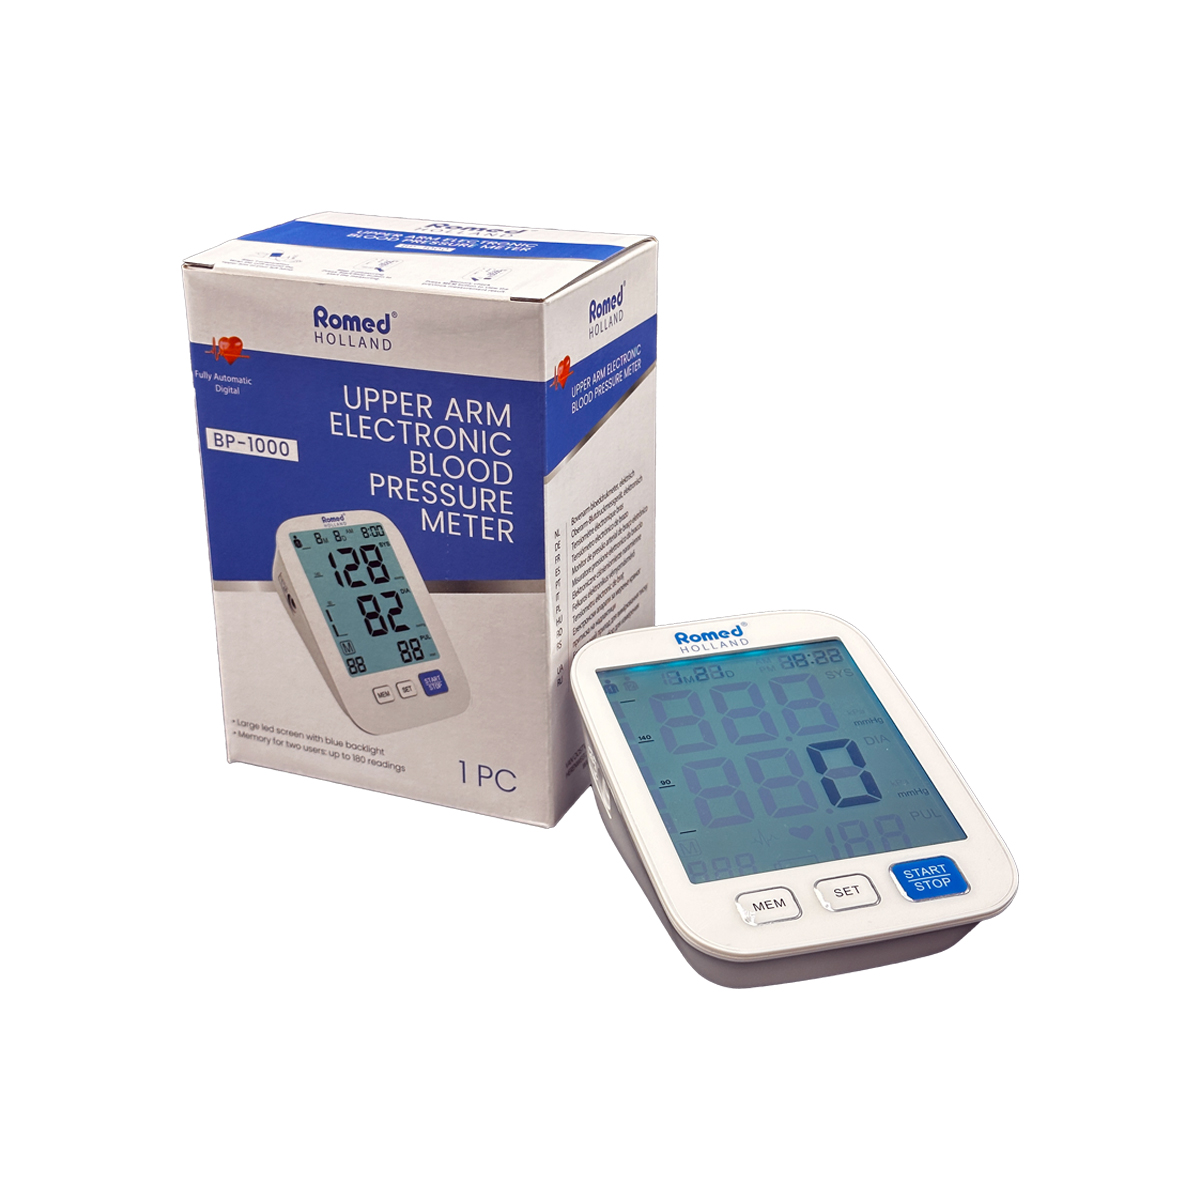 BP-1000 Romed blood pressure meters, fully automatic, electronic, per piece in an inner box, 10 pcs in a carton.